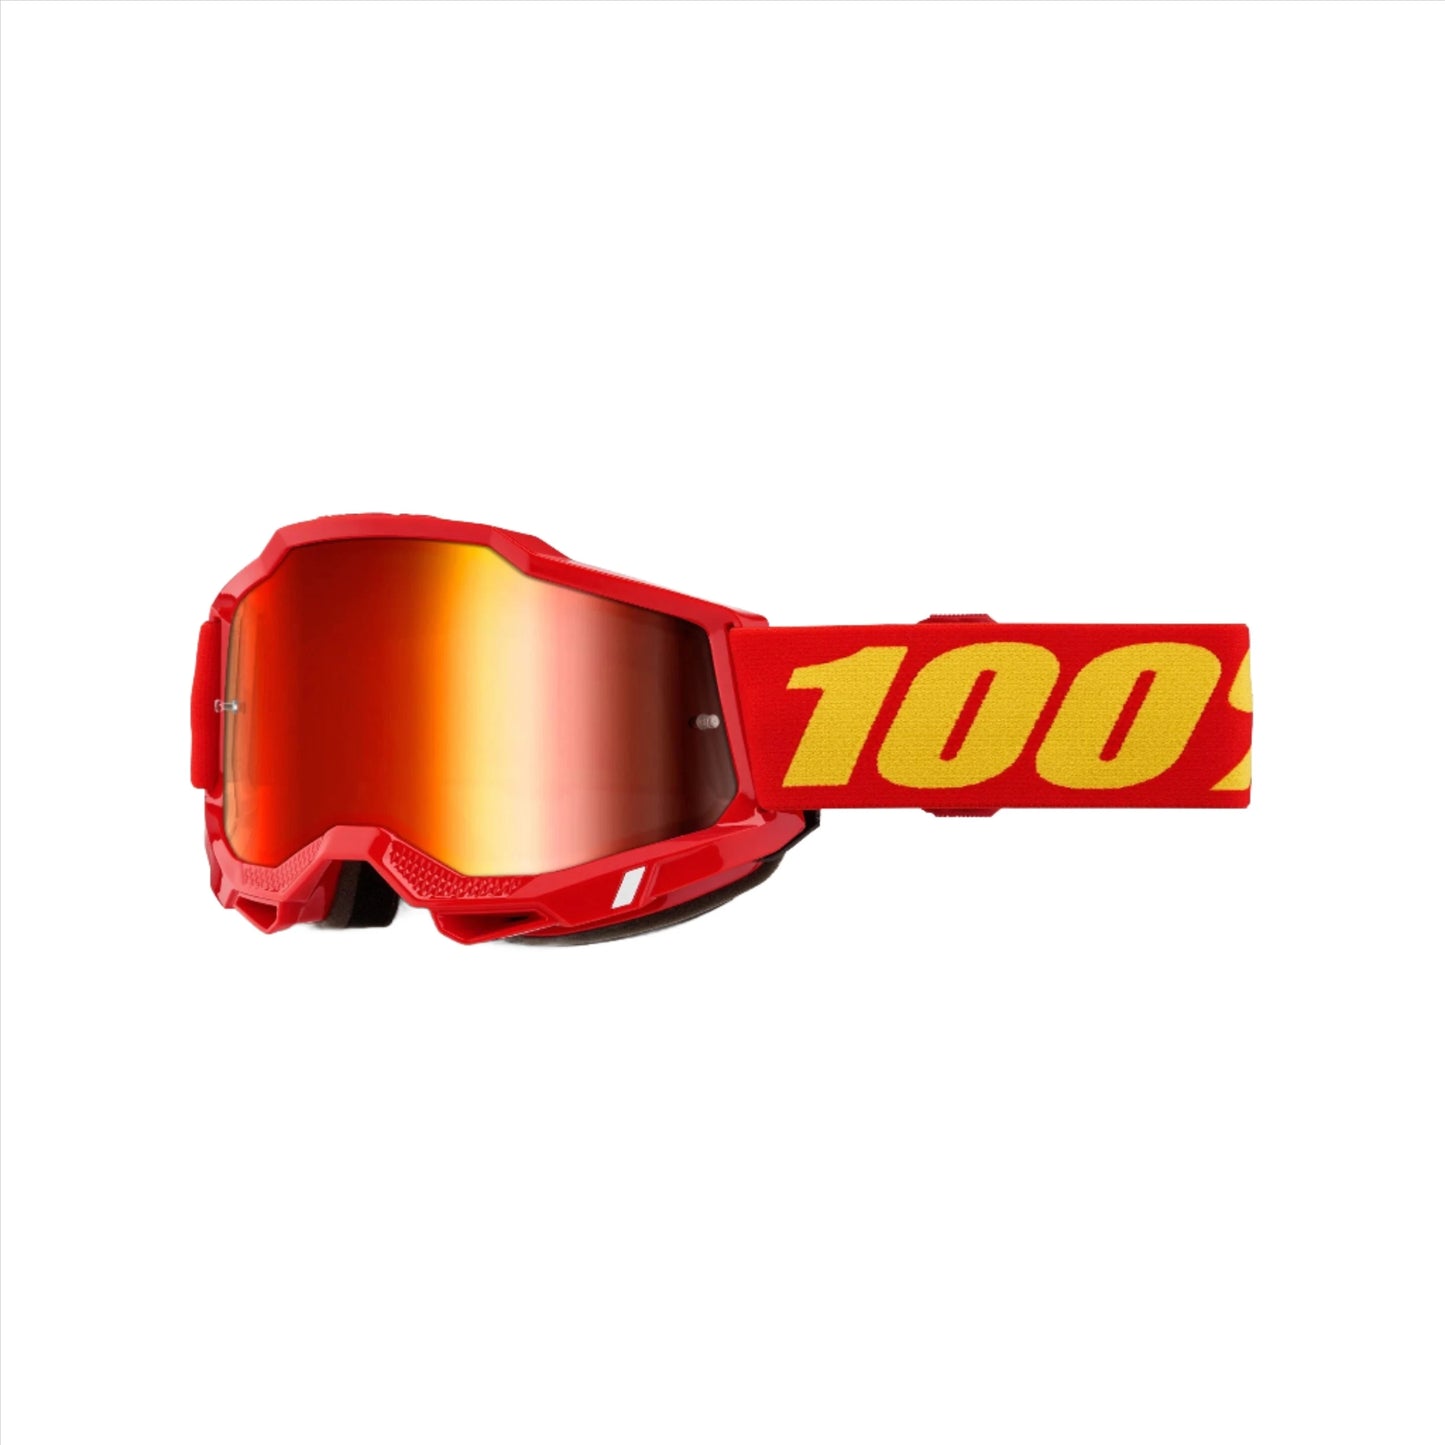 100 Percent Accuri 2 Goggles - One Size Fits Most - Red - Mirror Red Lens